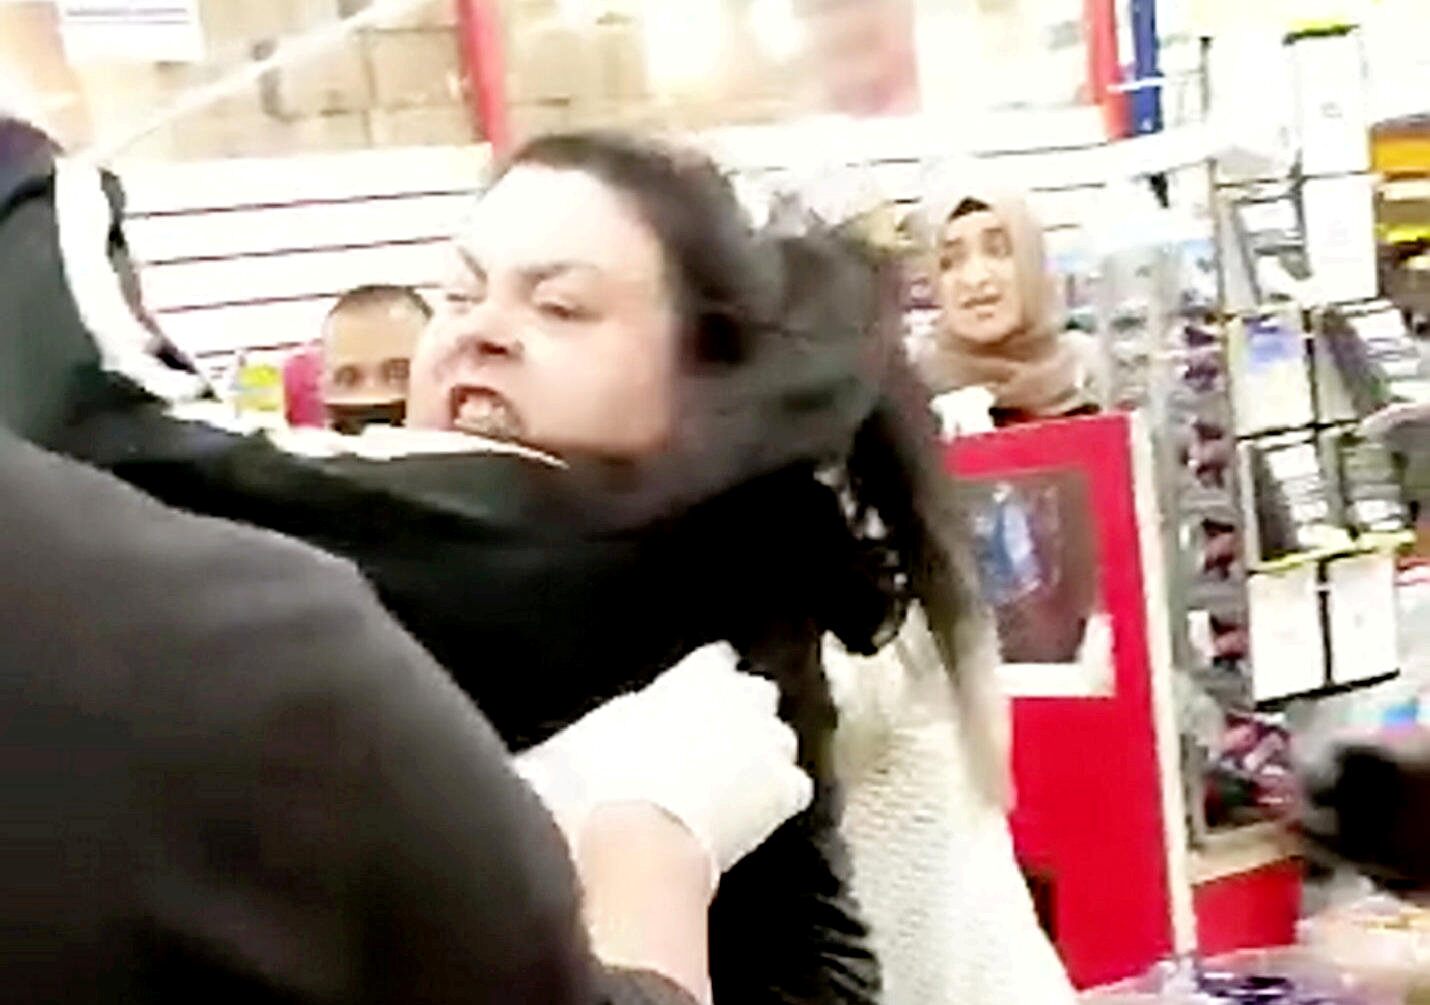 Woman attacks customer at supermarket over allegedly not following social distancing rules